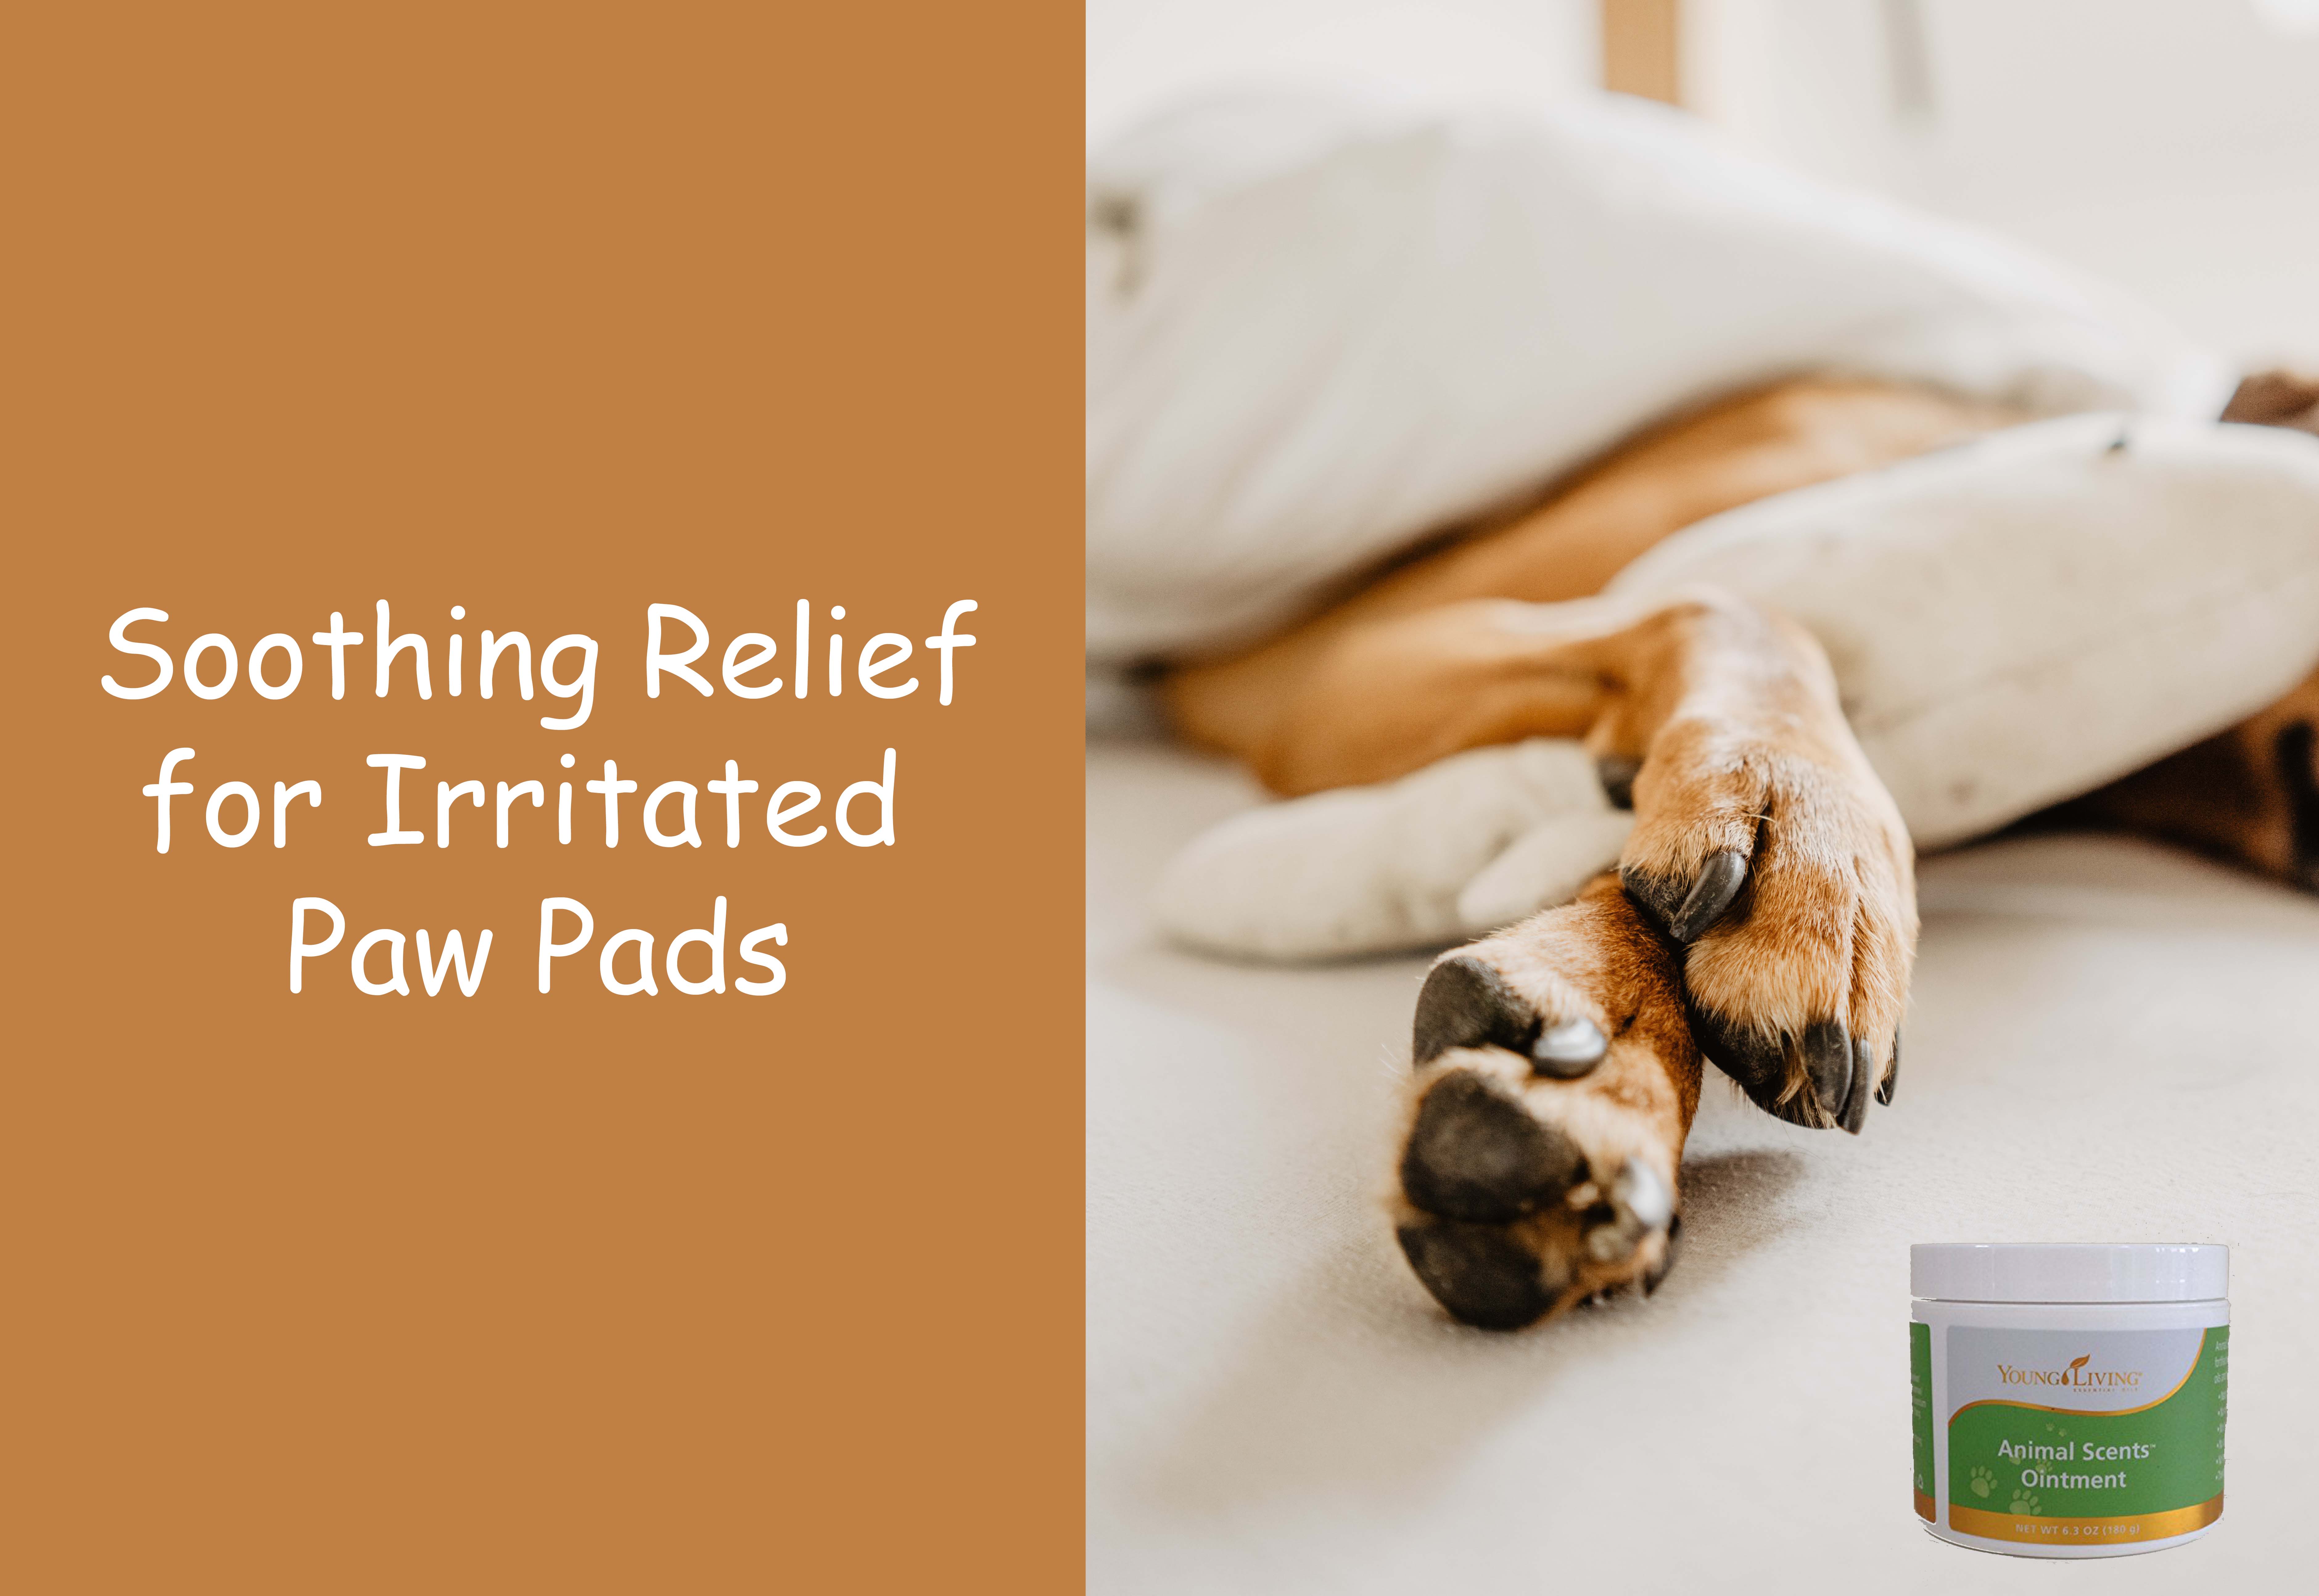 Paw Pad Protection – Animal Scents Ointment